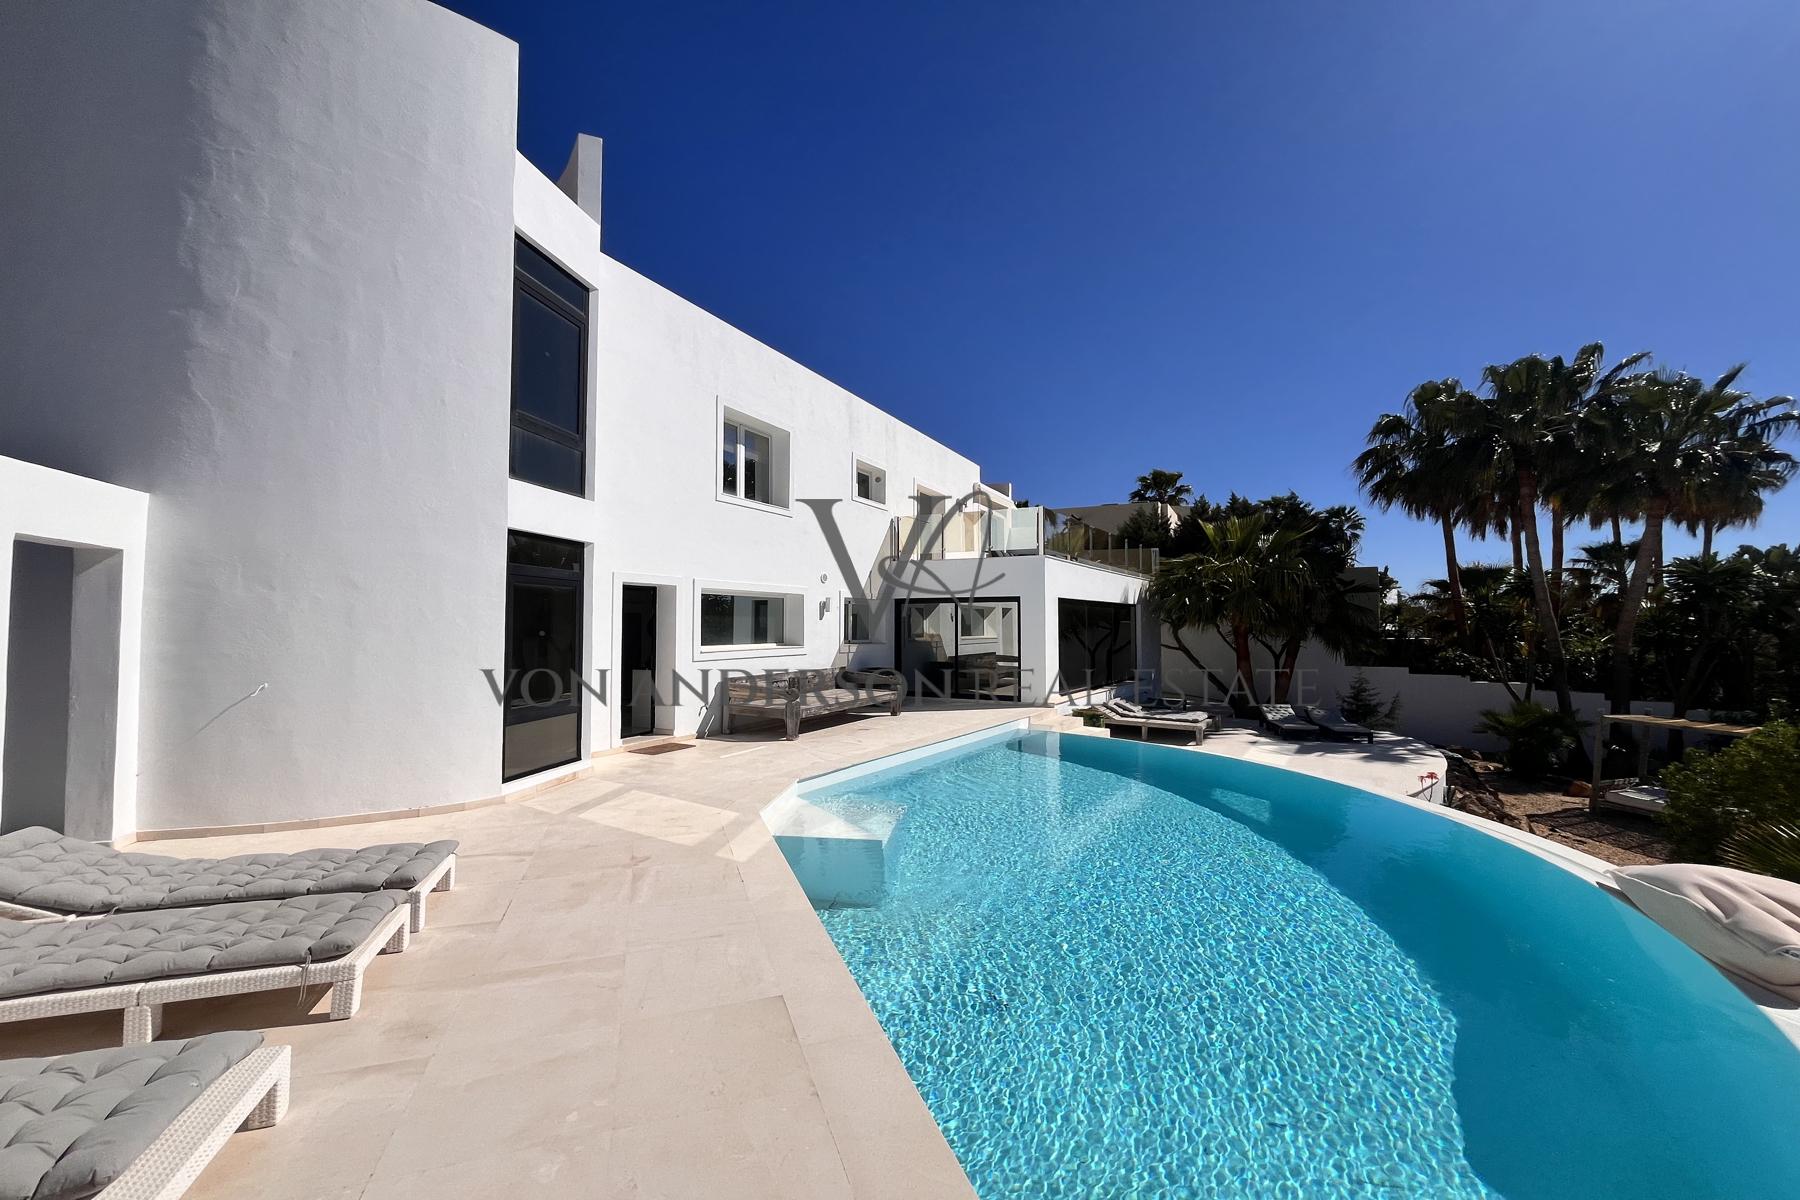 Stunning Independent Villa with Tourist License, Overlooking the Sea with Sunset Views, ref. VA1028, for sale in Ibiza by Von Anderson Real Estate